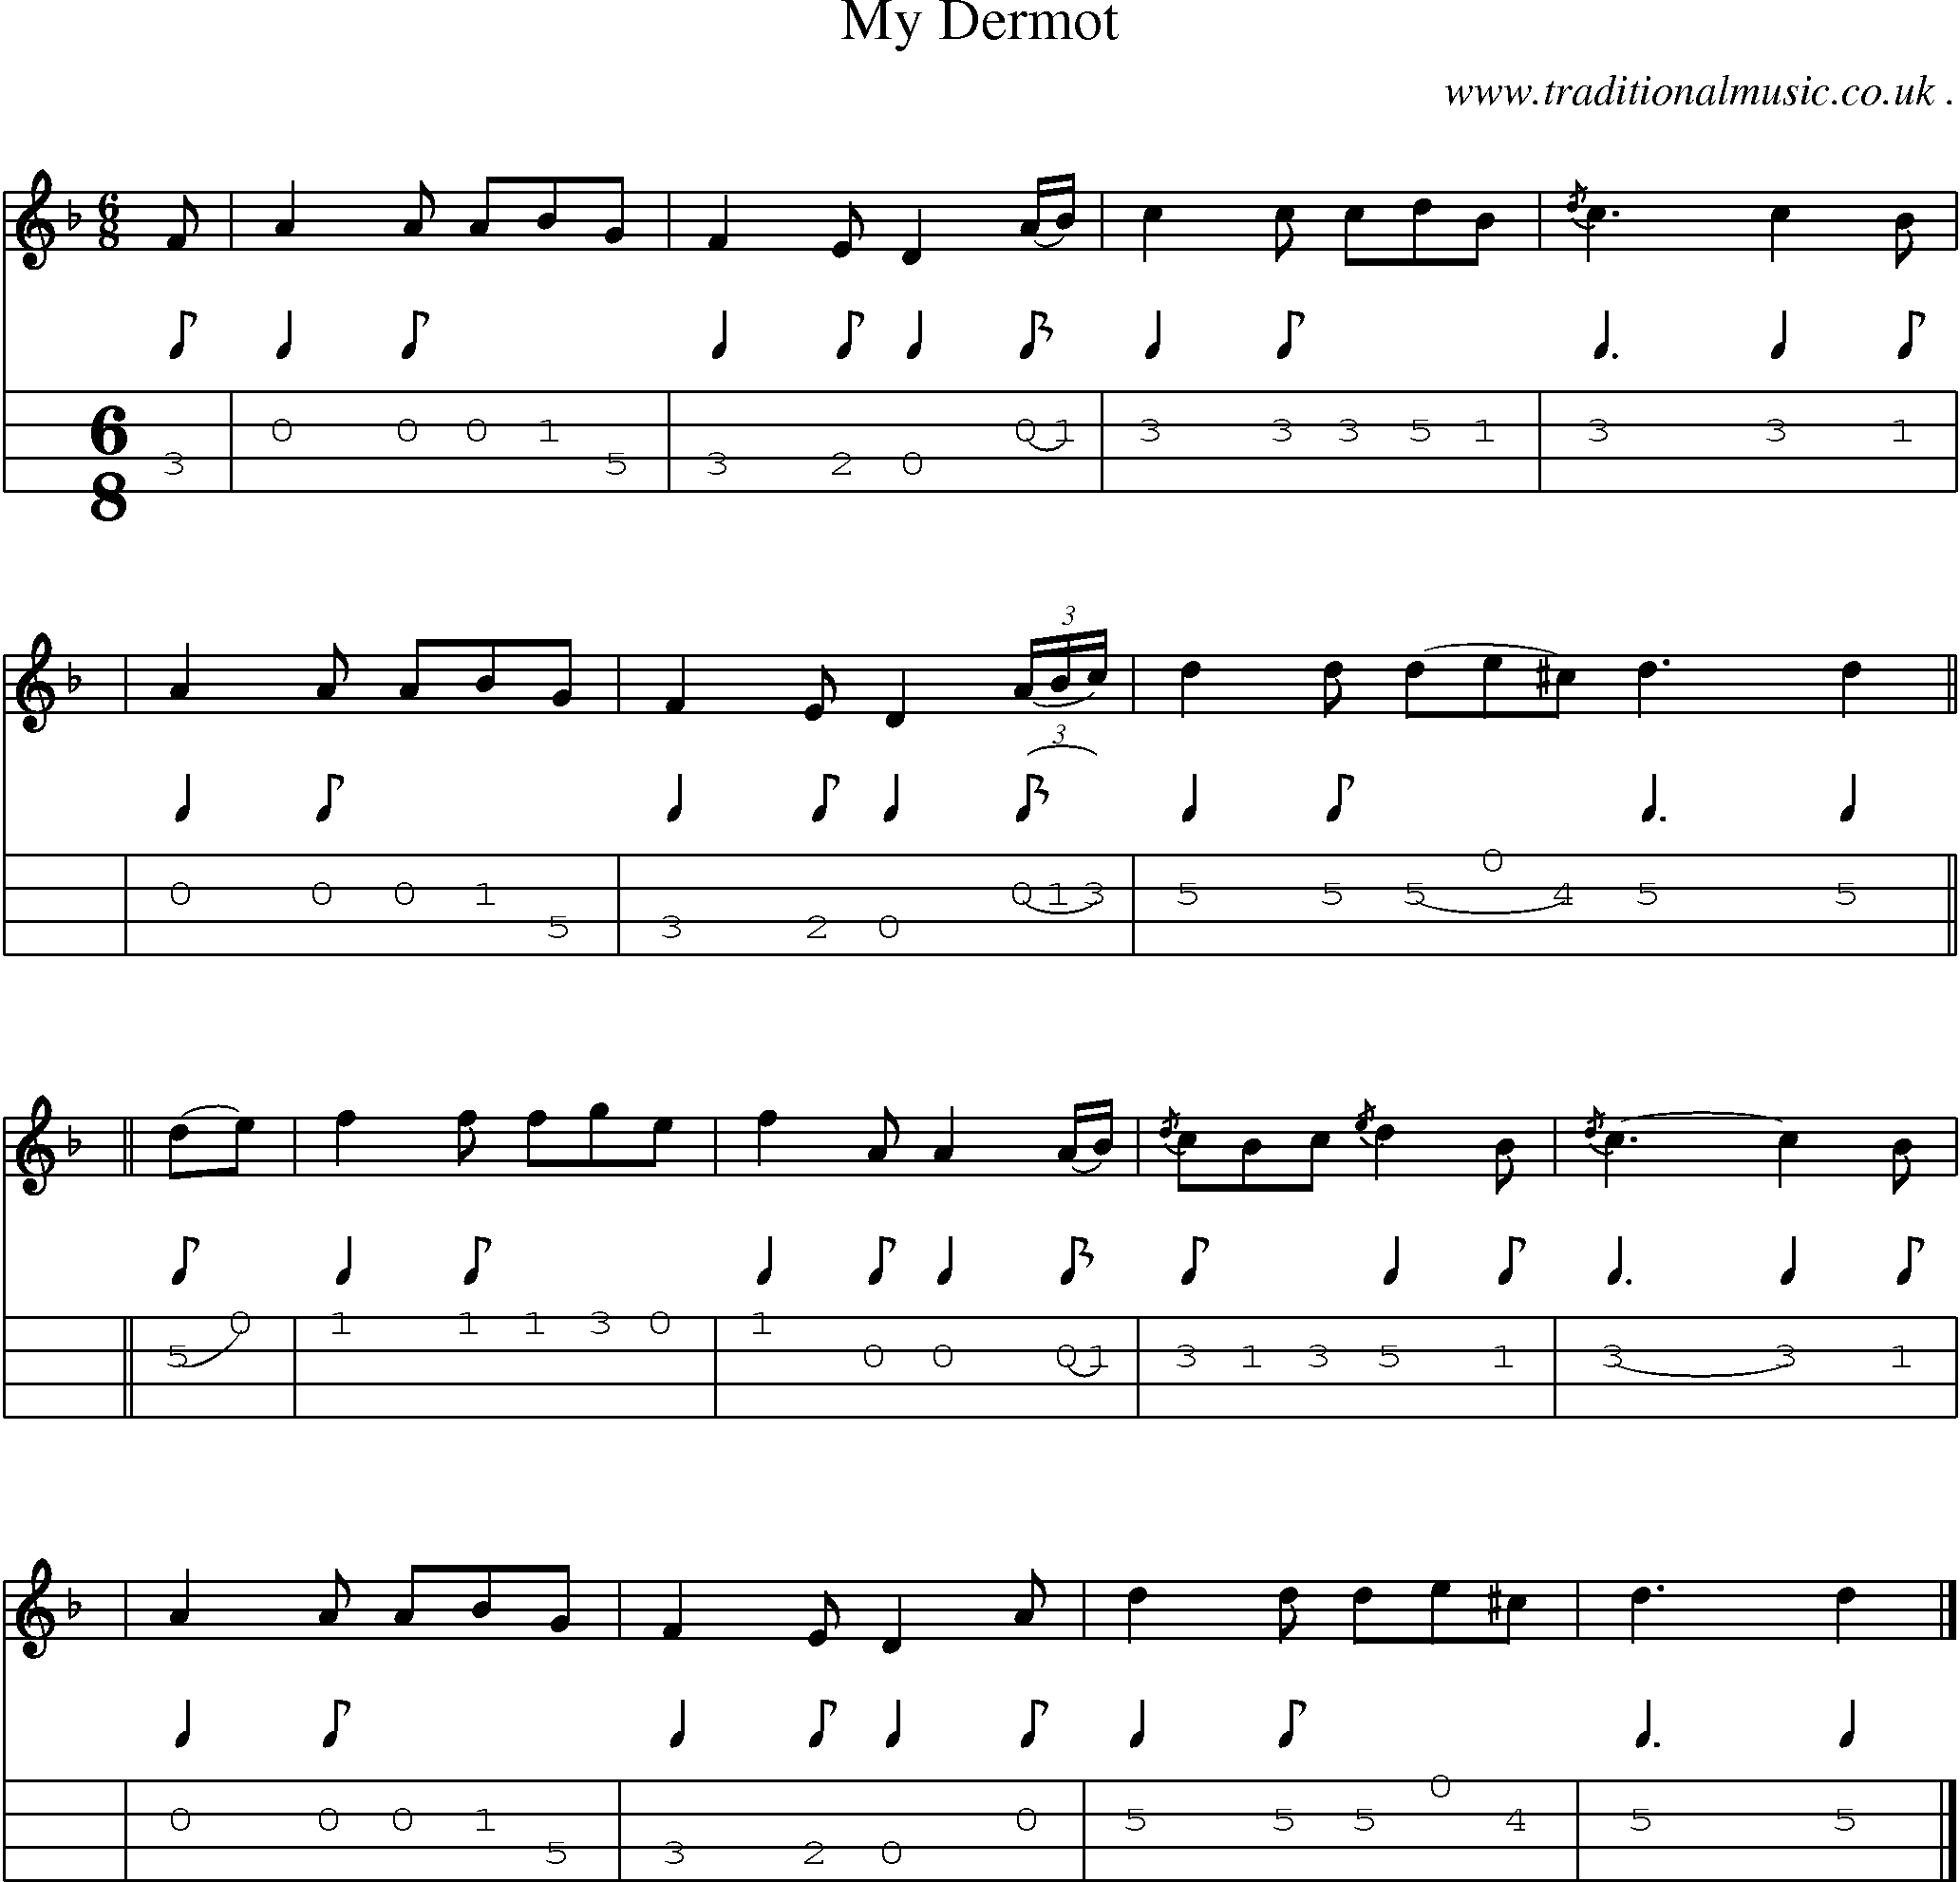 Sheet-music  score, Chords and Mandolin Tabs for My Dermot